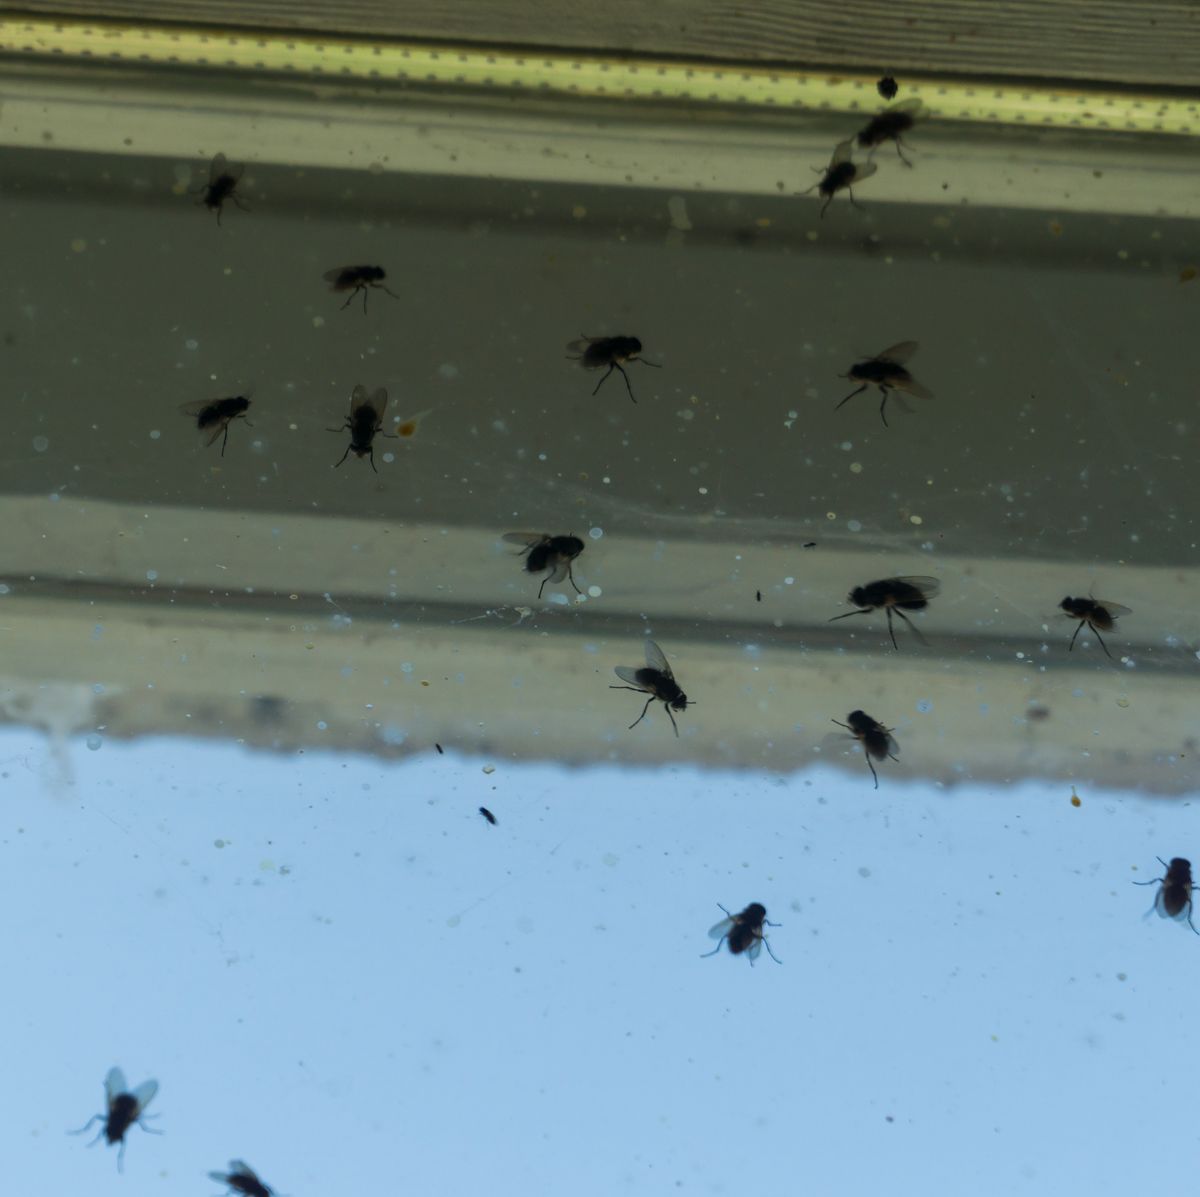 Controlling Flies in Your Home